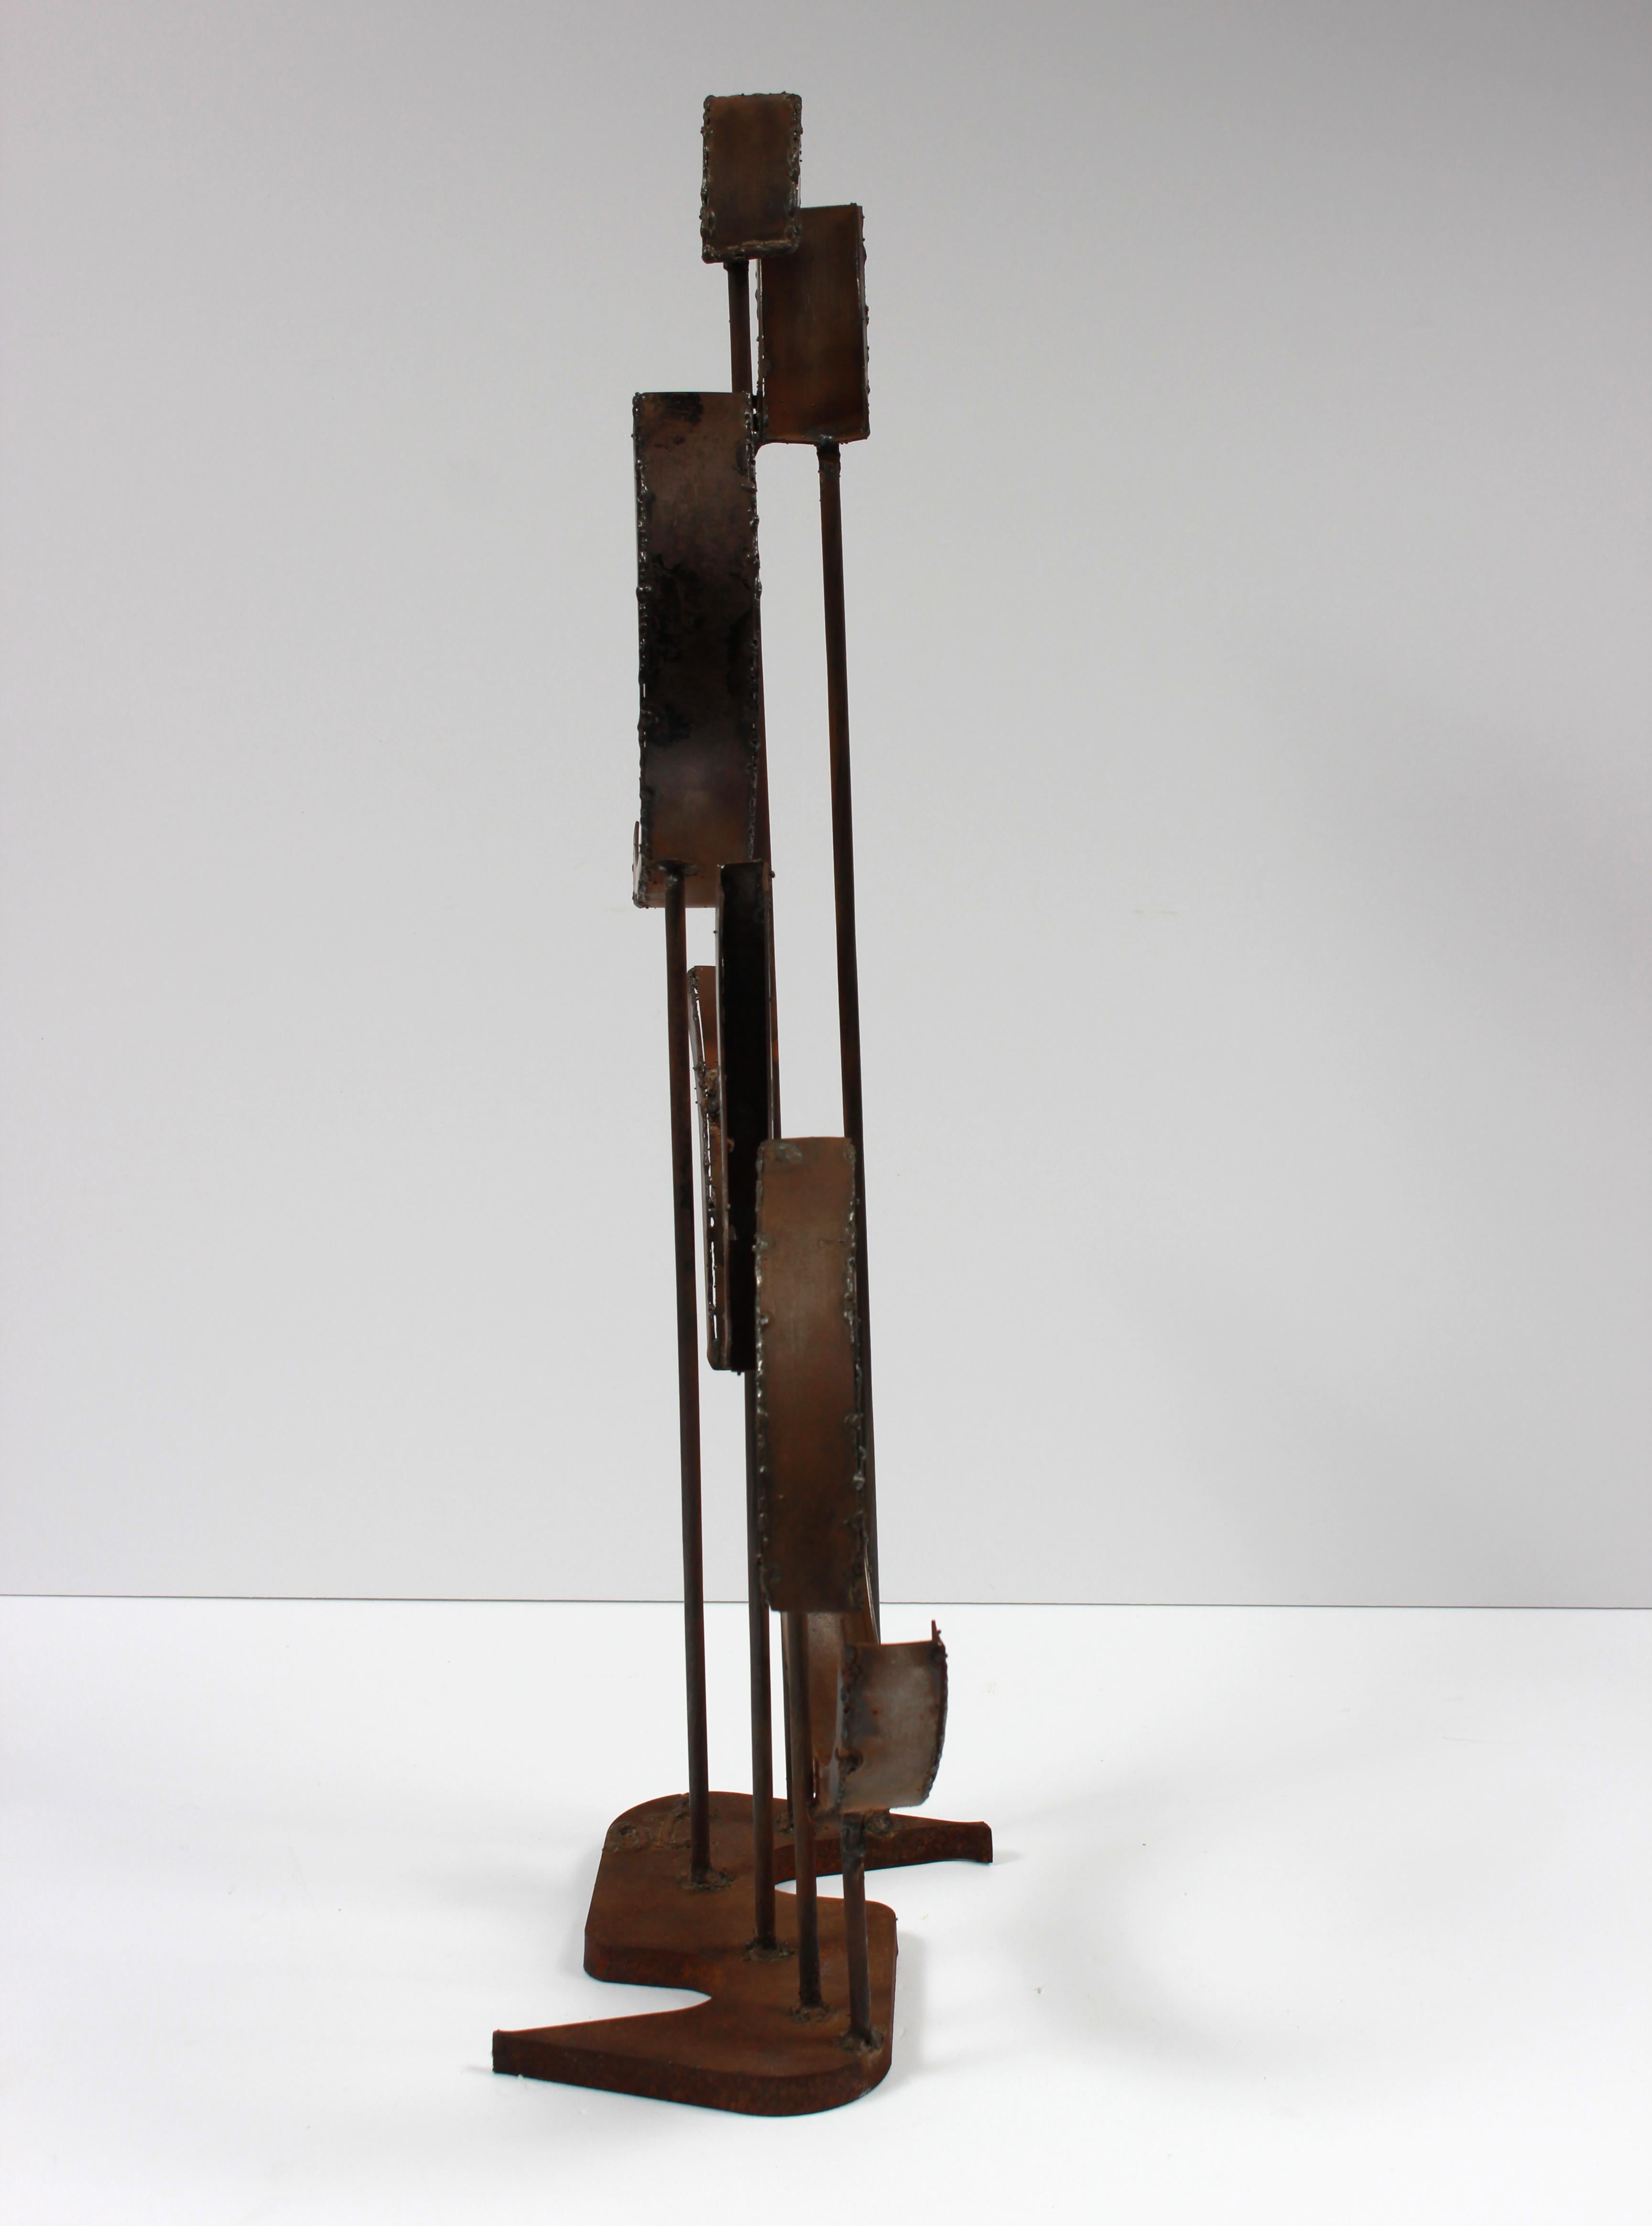 This late 20th century geometric multimedia welded metal sculpture stands on its own and is signed by the artist at the bottom.  Purchased from a collector and part of a larger body of sculptural work.